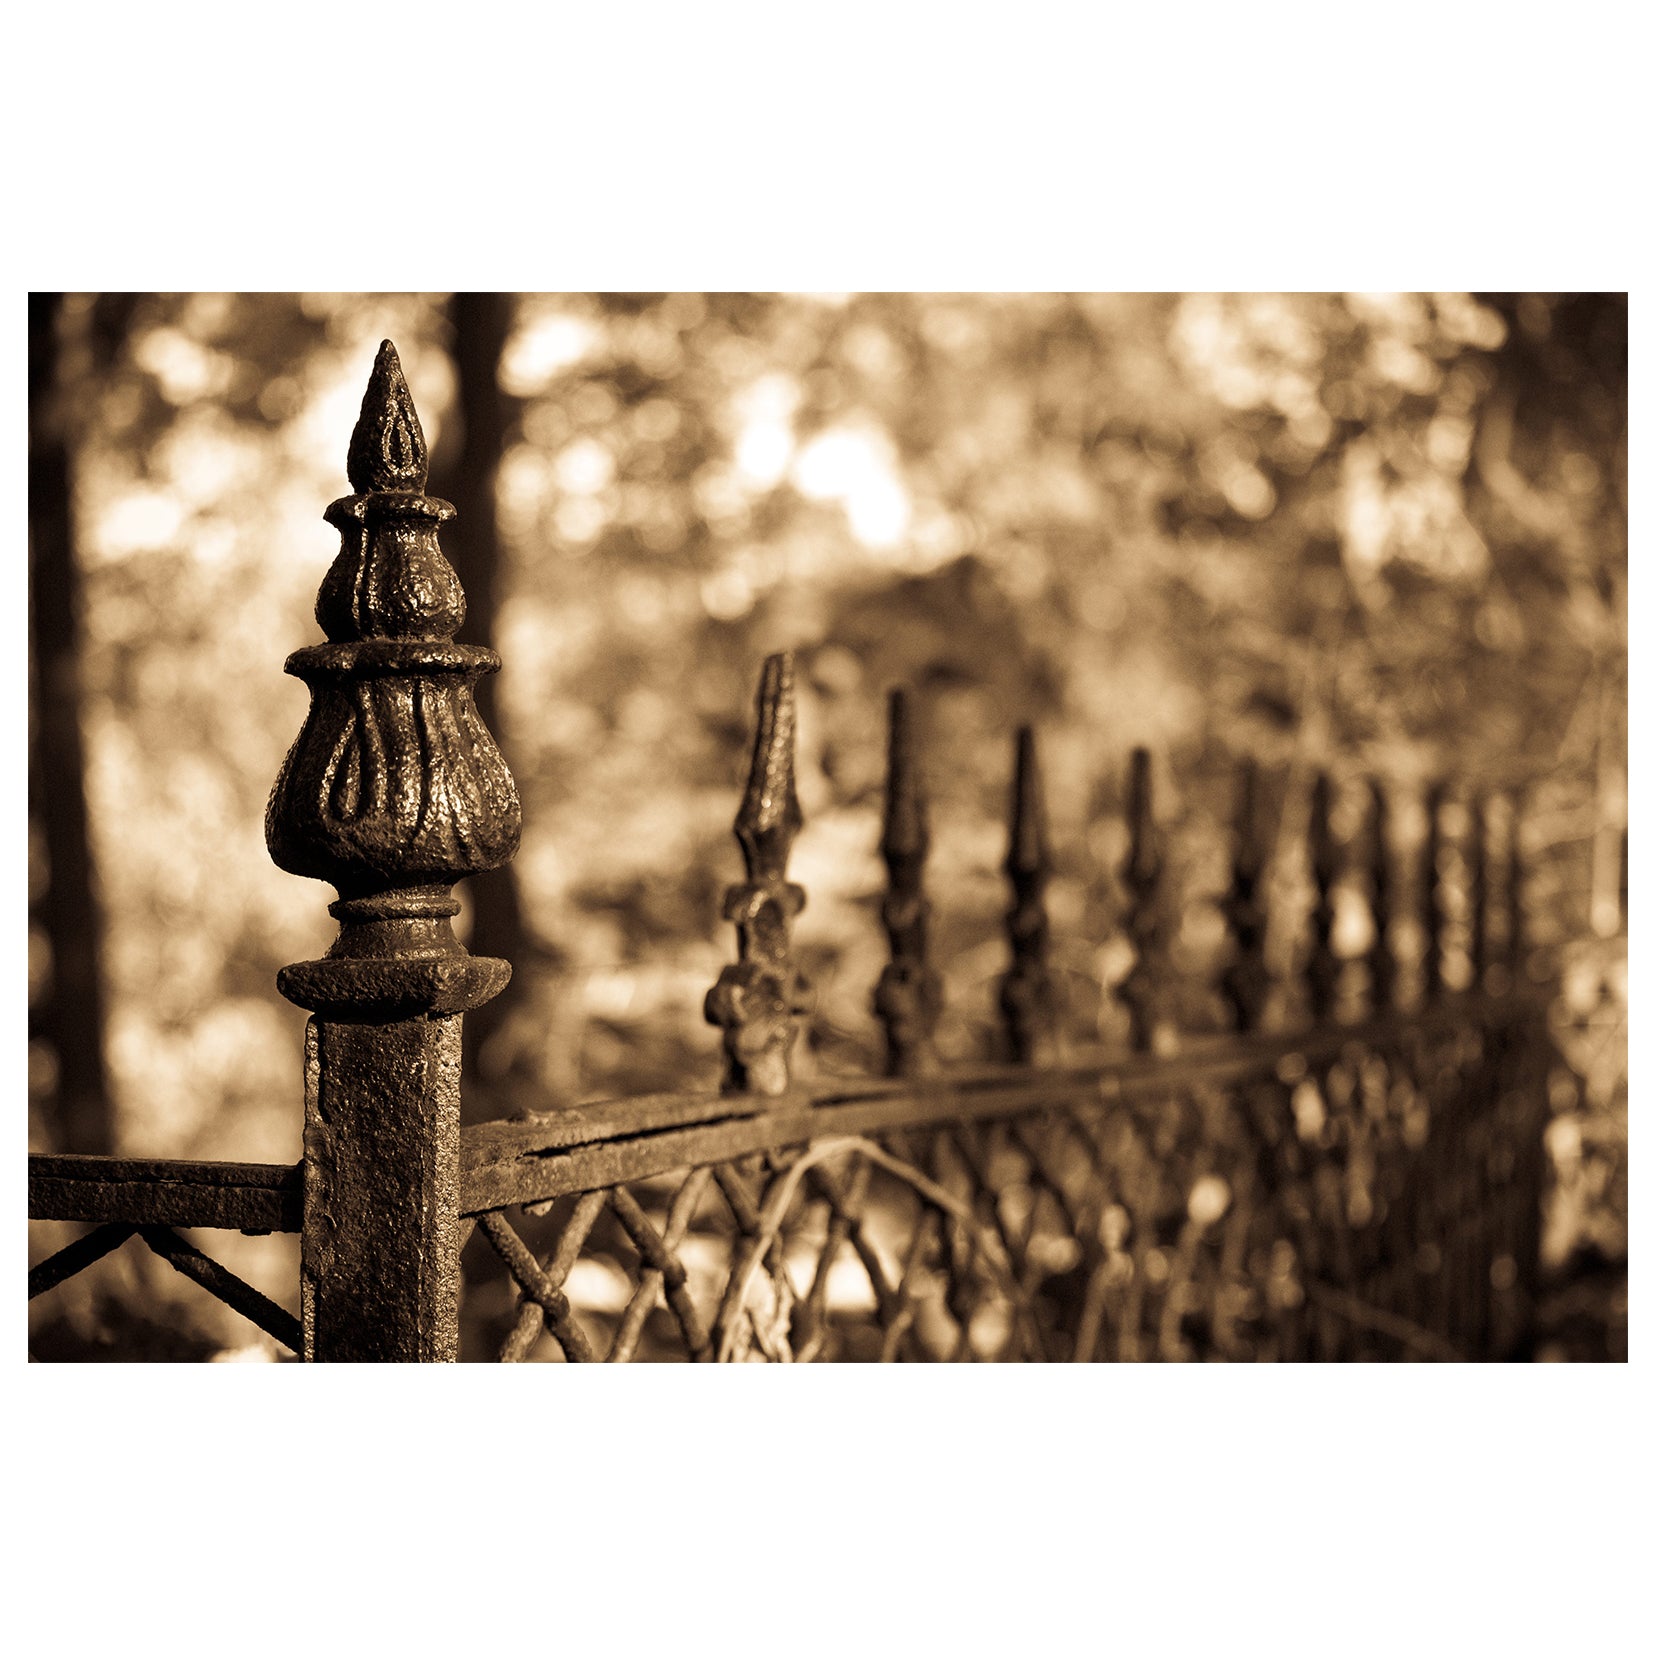 Sepia Antique Fence Abstract Photo Fine Art Canvas & Unframed Wall Art Prints  - PIPAFINEART